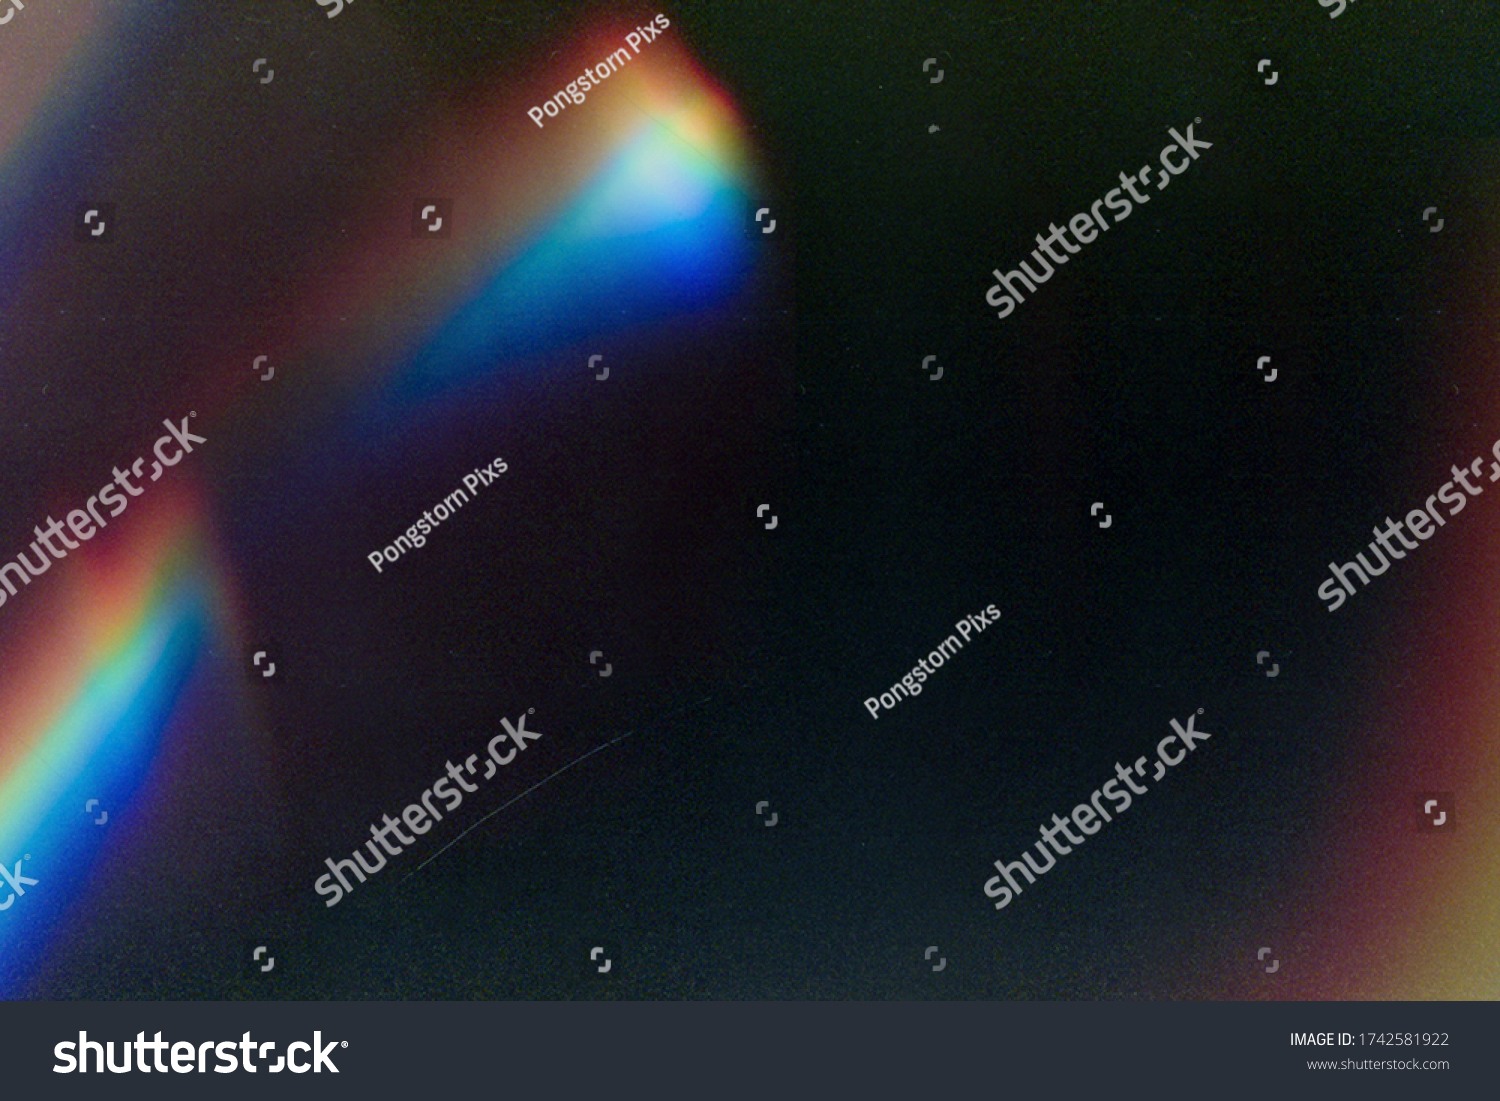 Designed film texture background with heavy grain, dust and a light leak Real Lens Flare Shot in Studio over Black Background. Easy to add as Overlay or Screen Filter over Photos overlay #1742581922